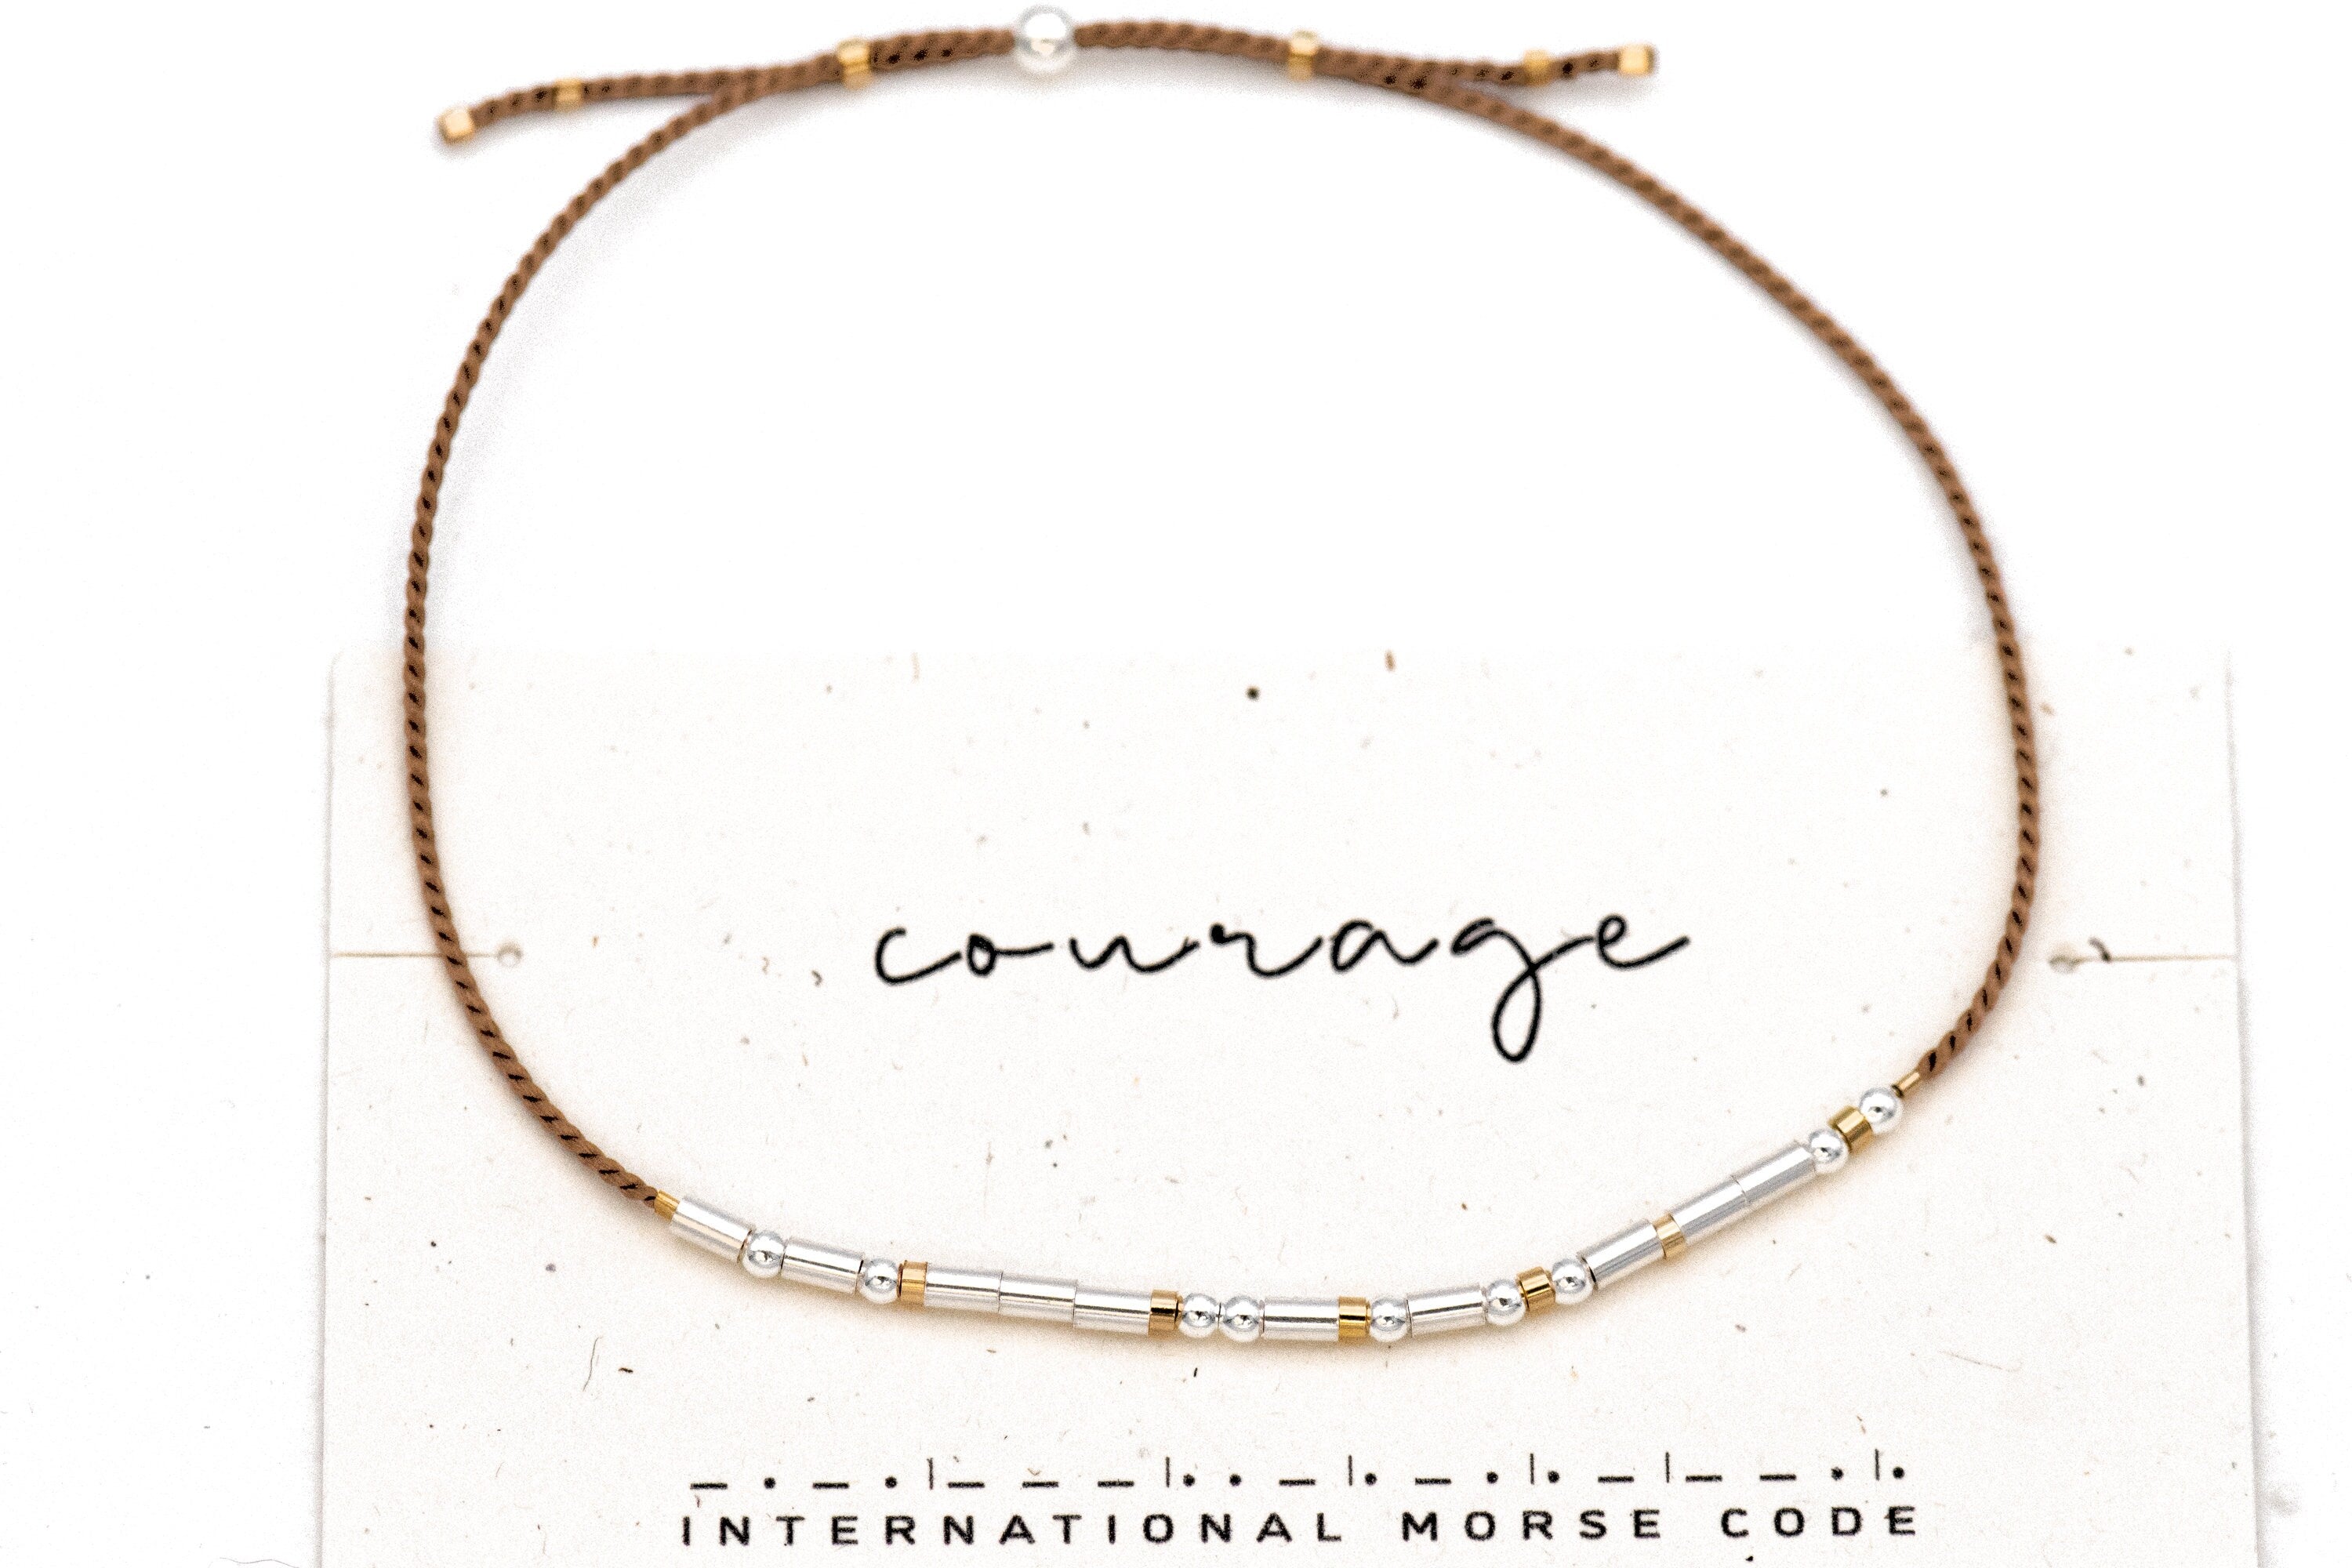 Courage Morse Code Bracelet, Ships Out Nxt Day. Strength or Other Words in Morse, Silver Beads, Water-Friendly Top Affirmation Gifts